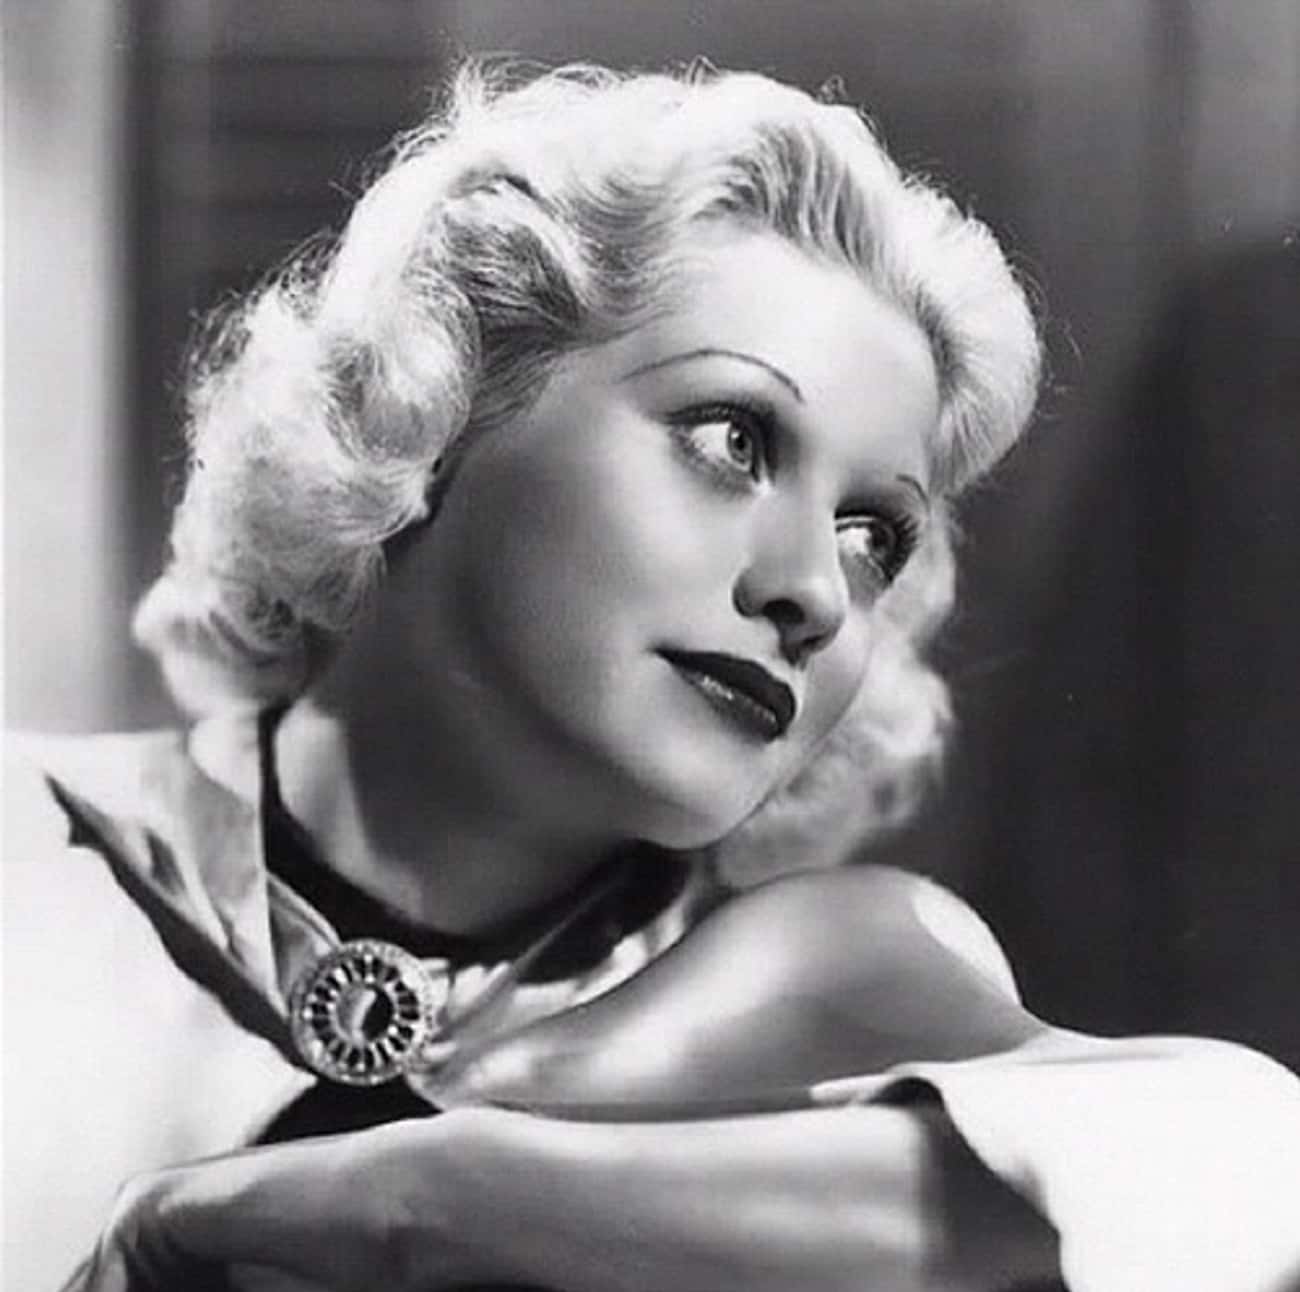 Young Lucille Ball in Satin Blouse with Broach